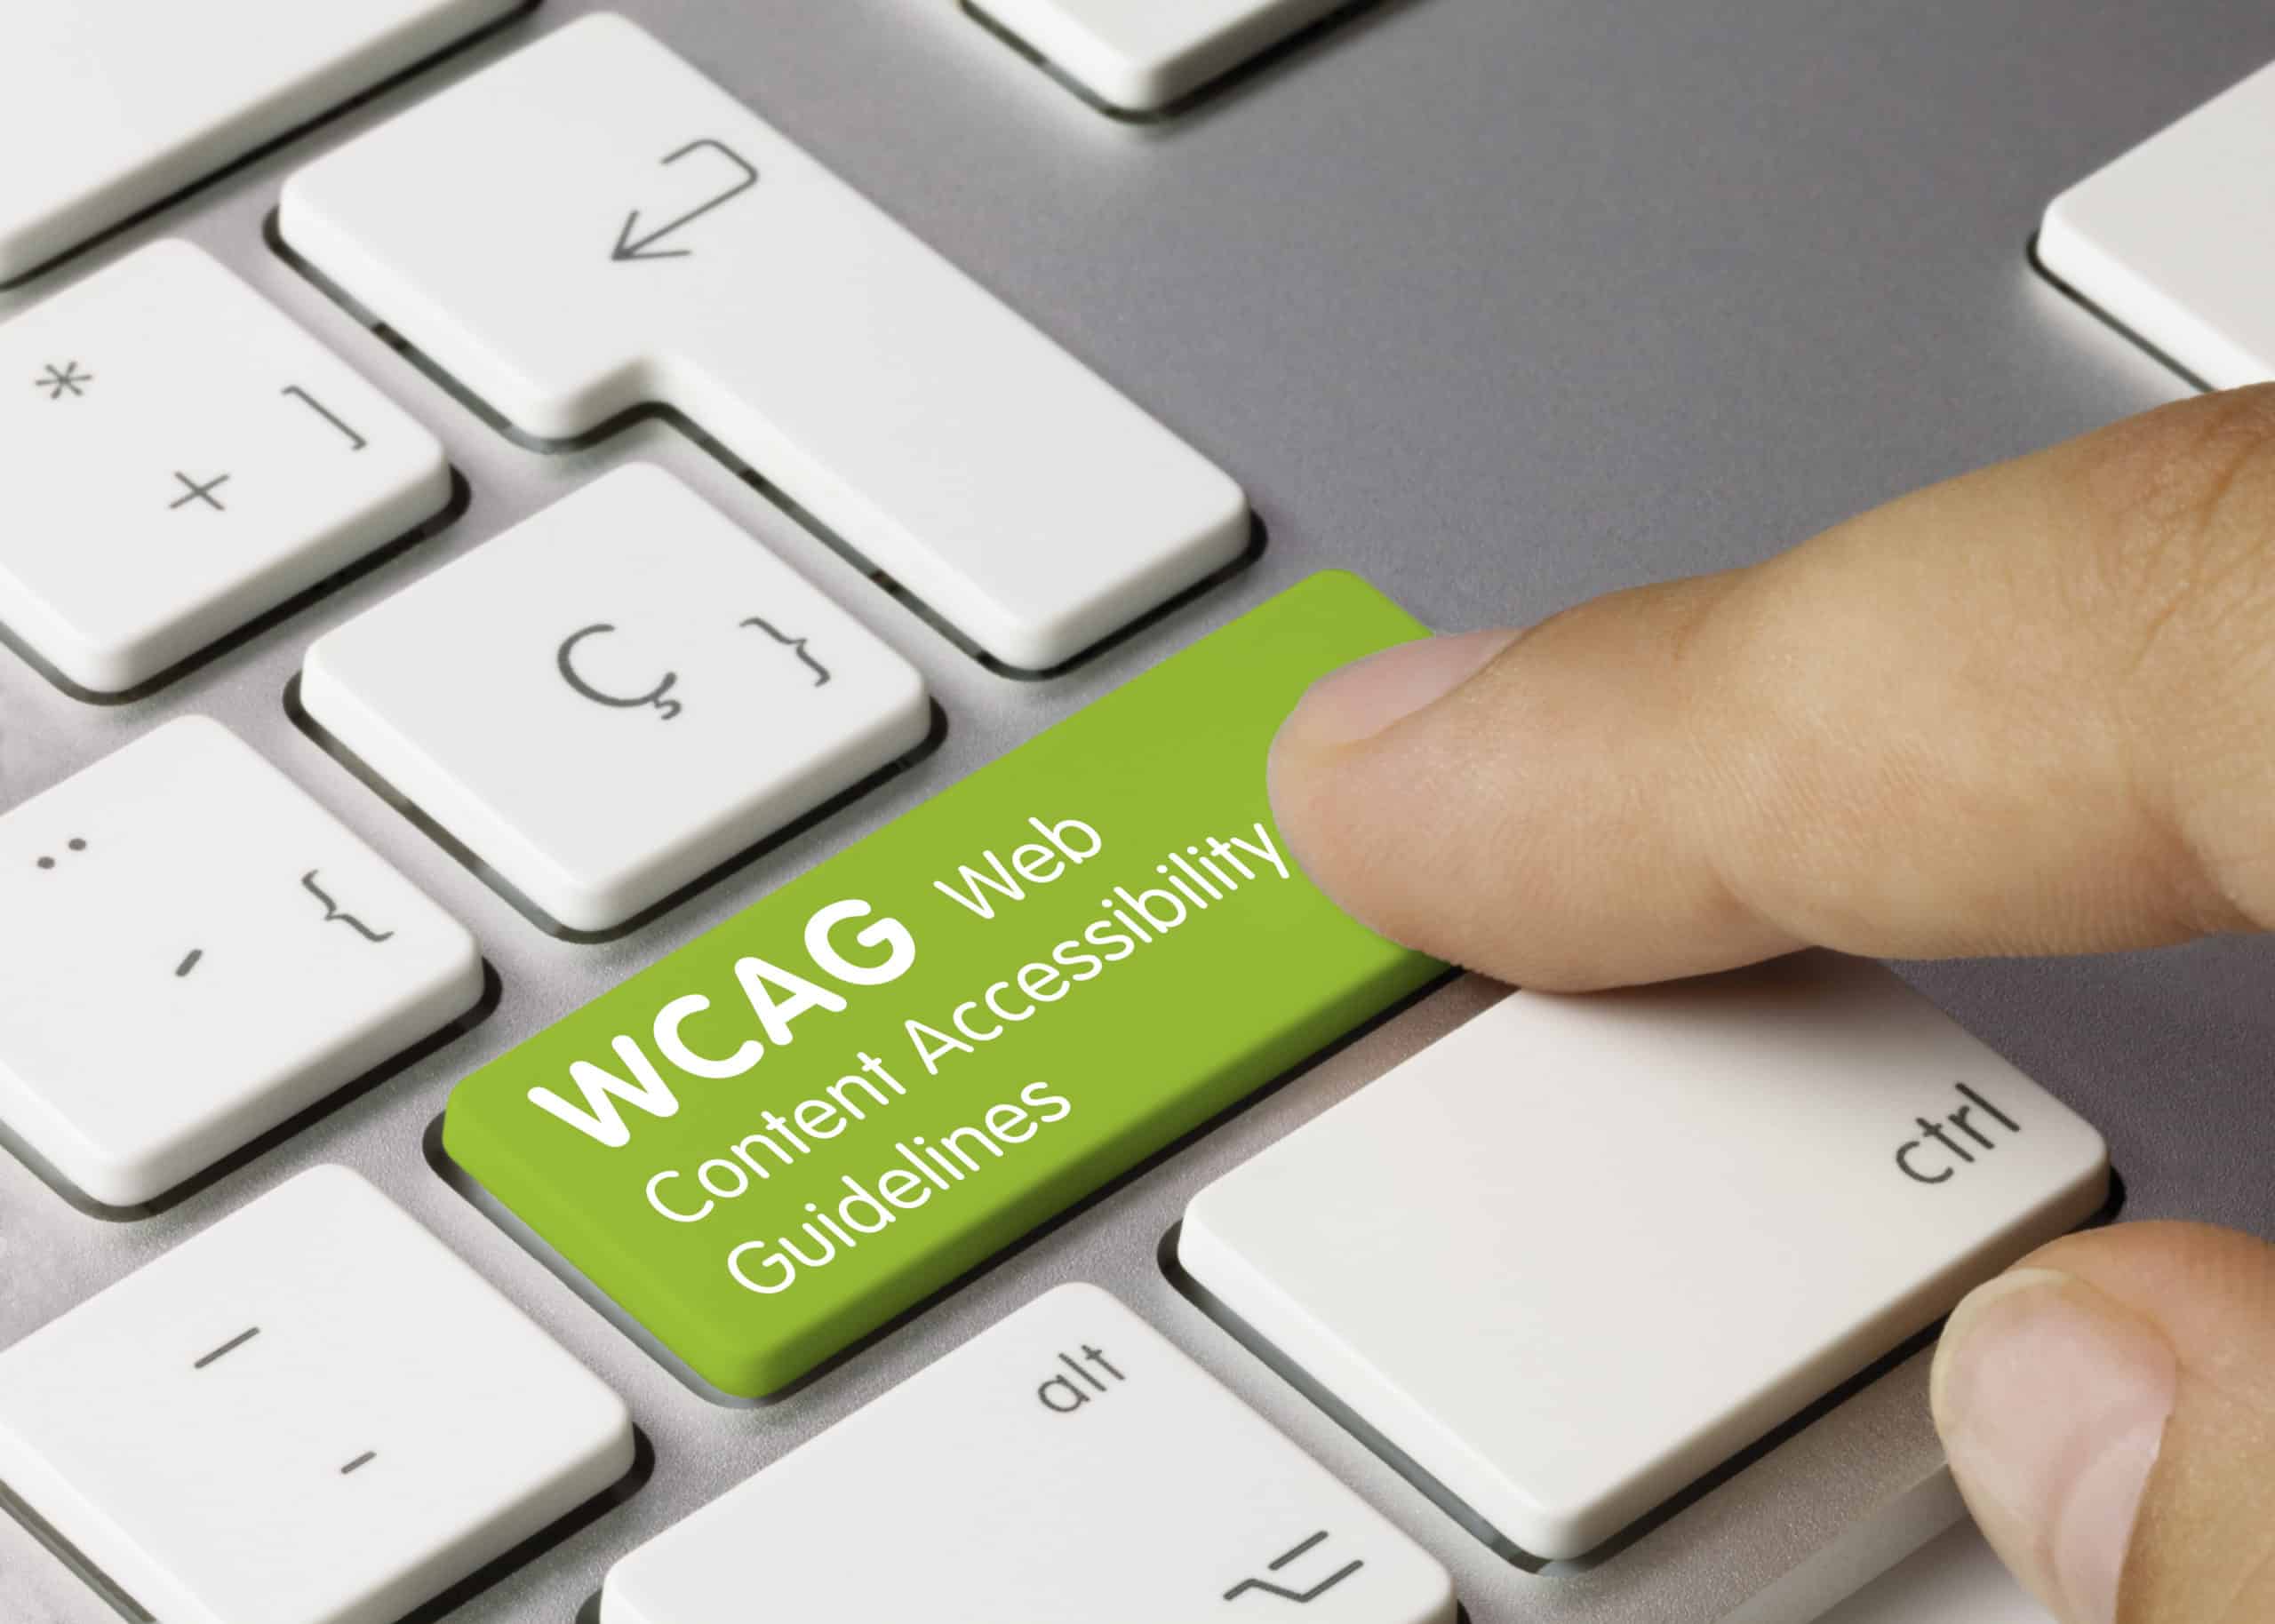 WCAG Web Content Accessibility Guidelines Keyboard